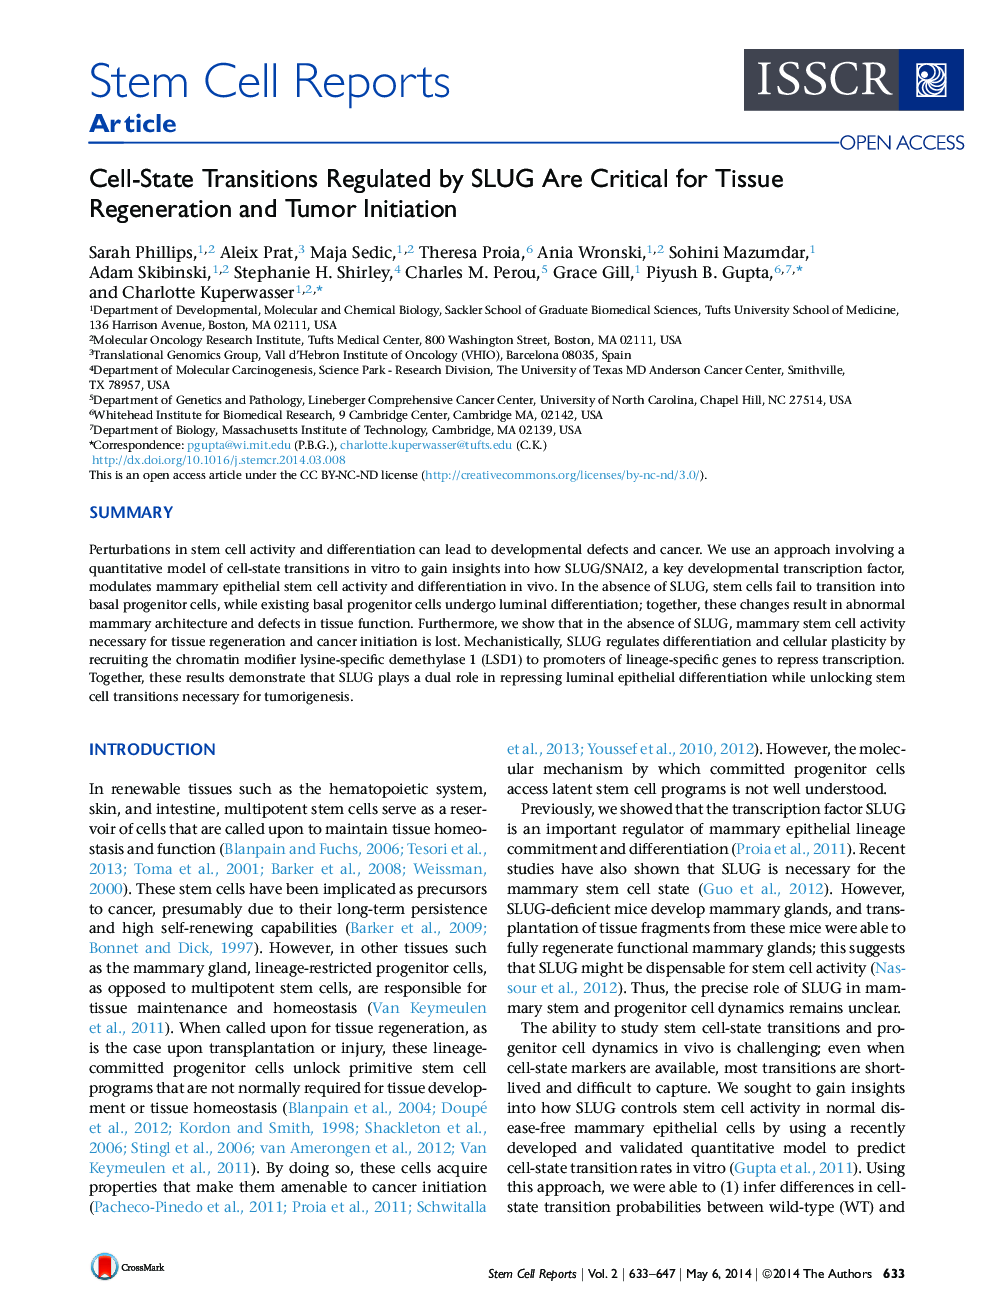 Cell-State Transitions Regulated by SLUG Are Critical for Tissue Regeneration and Tumor Initiation 